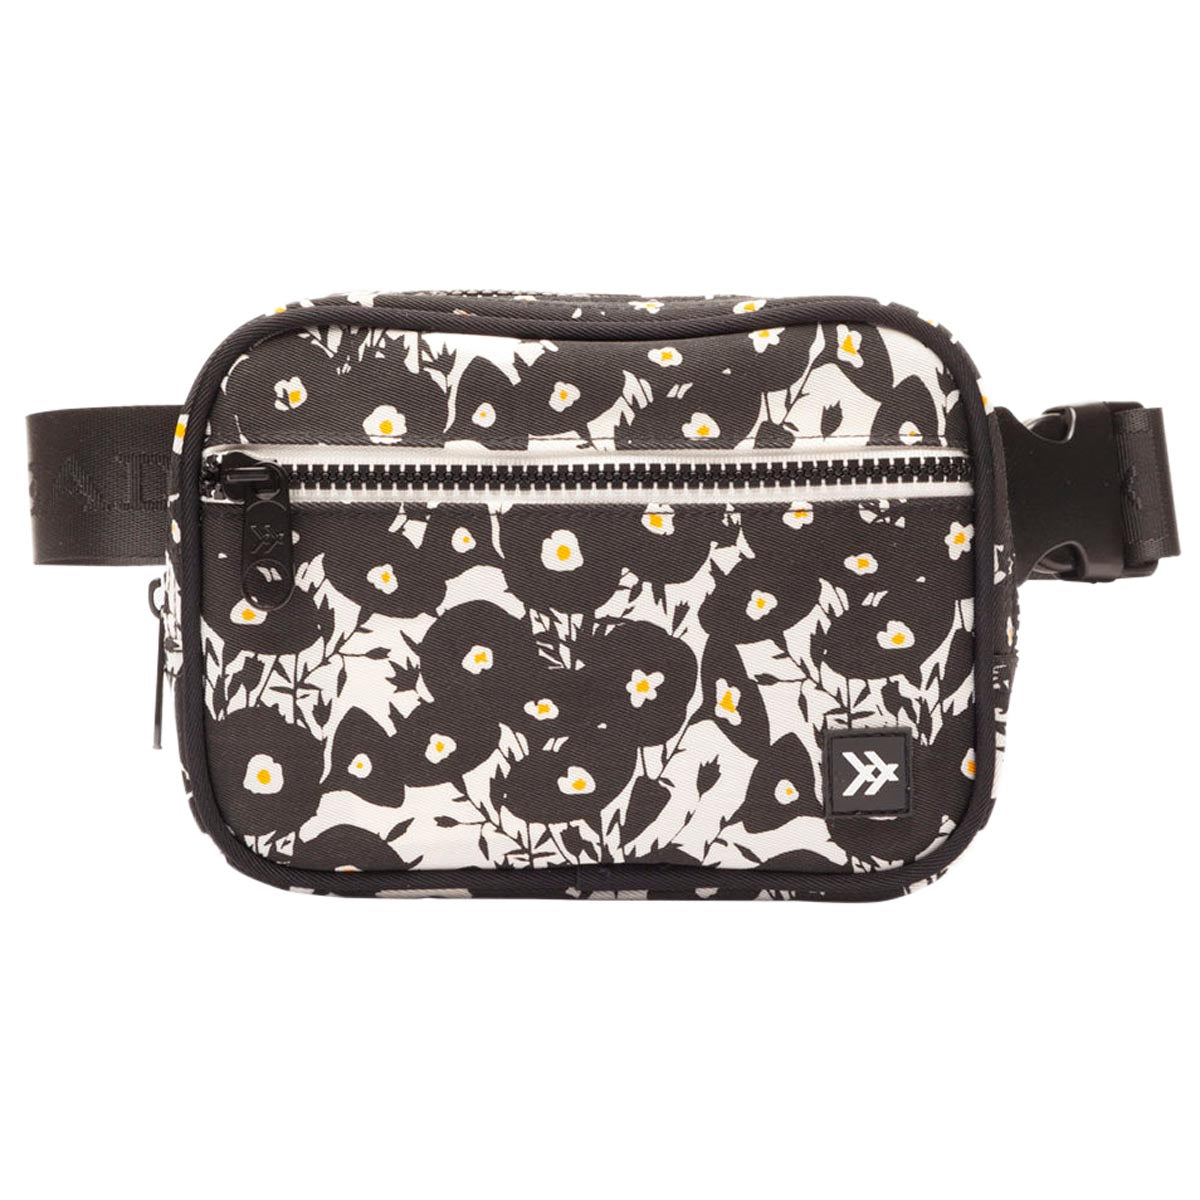 Thread Fanny Pack Bag - Colby image 1